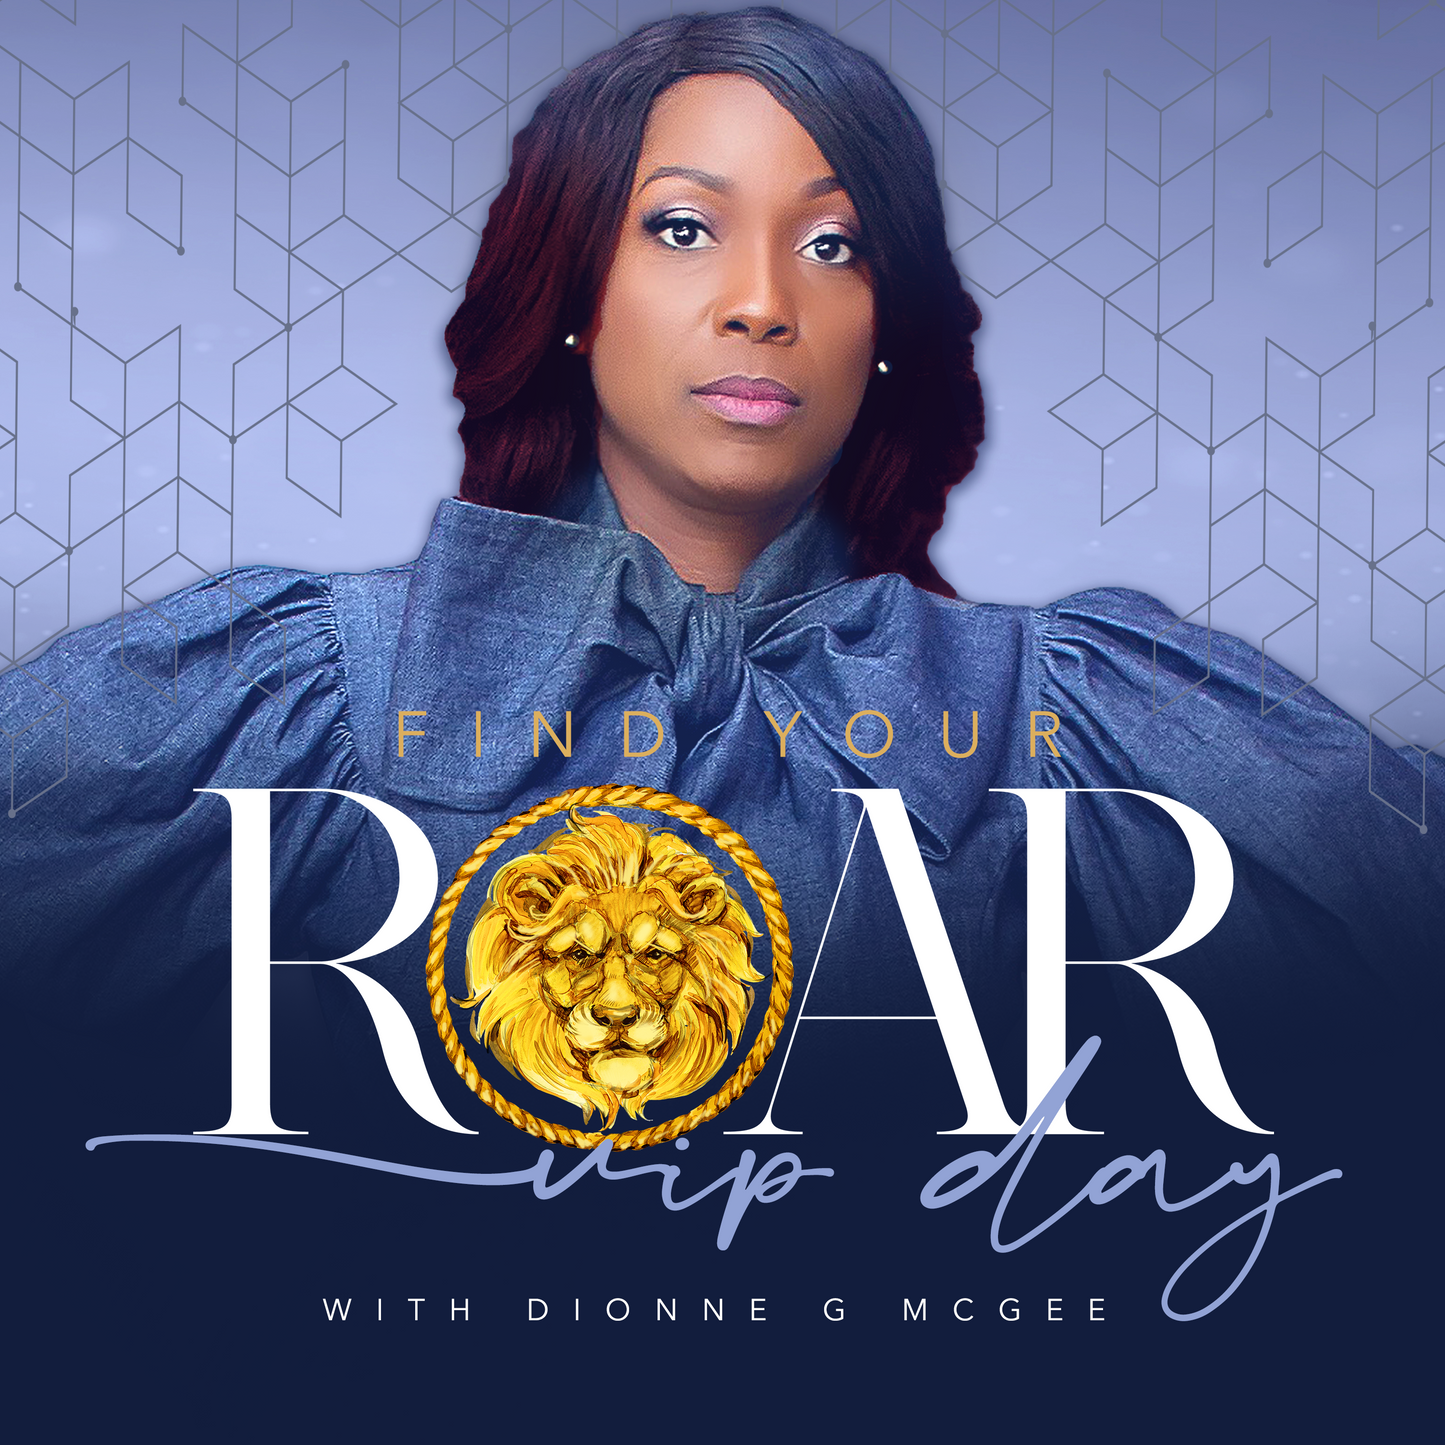 ROAR VIP DAY with Dionne G McGee